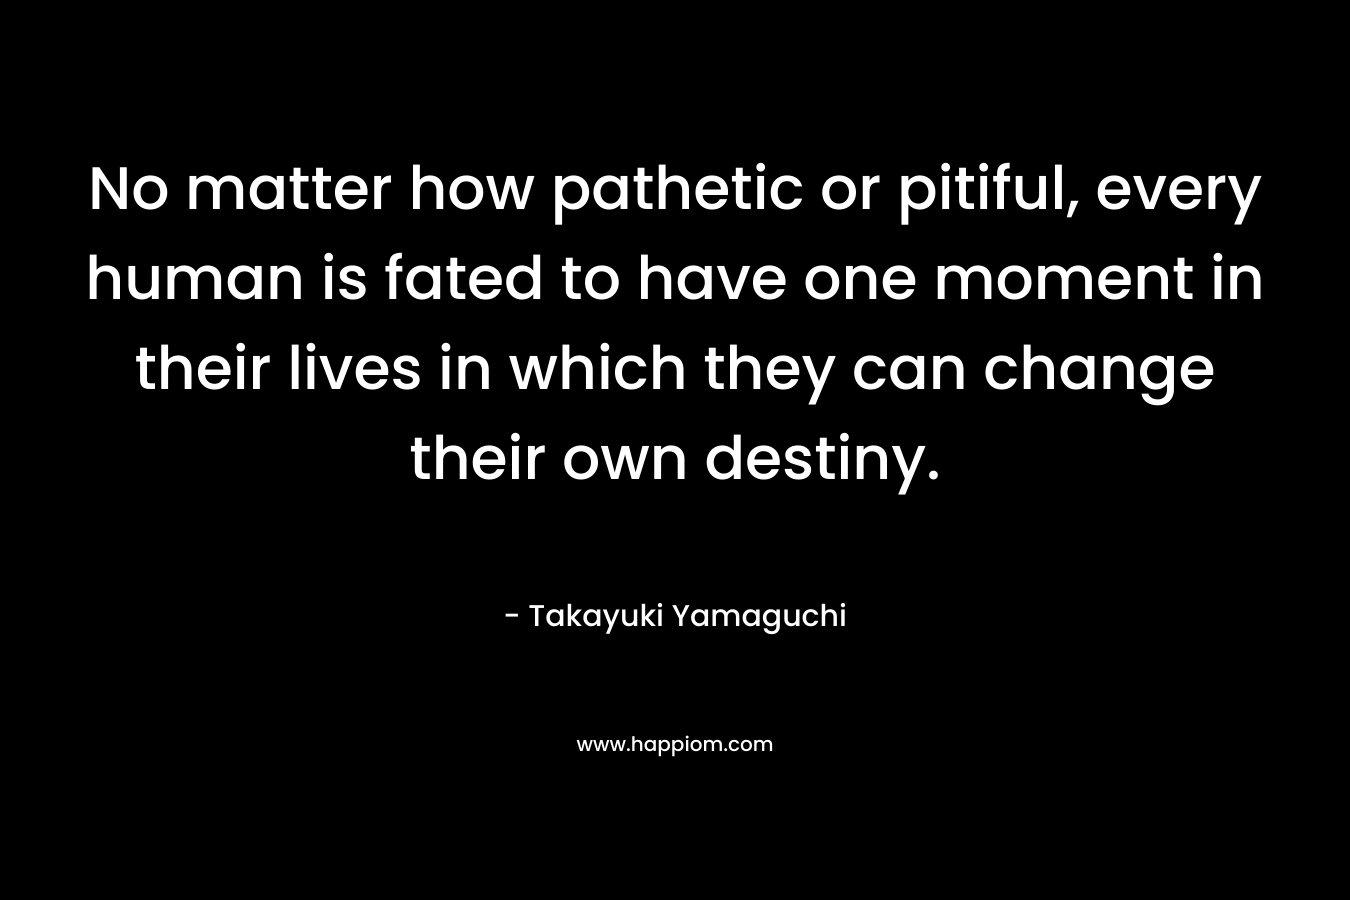 No matter how pathetic or pitiful, every human is fated to have one moment in their lives in which they can change their own destiny.